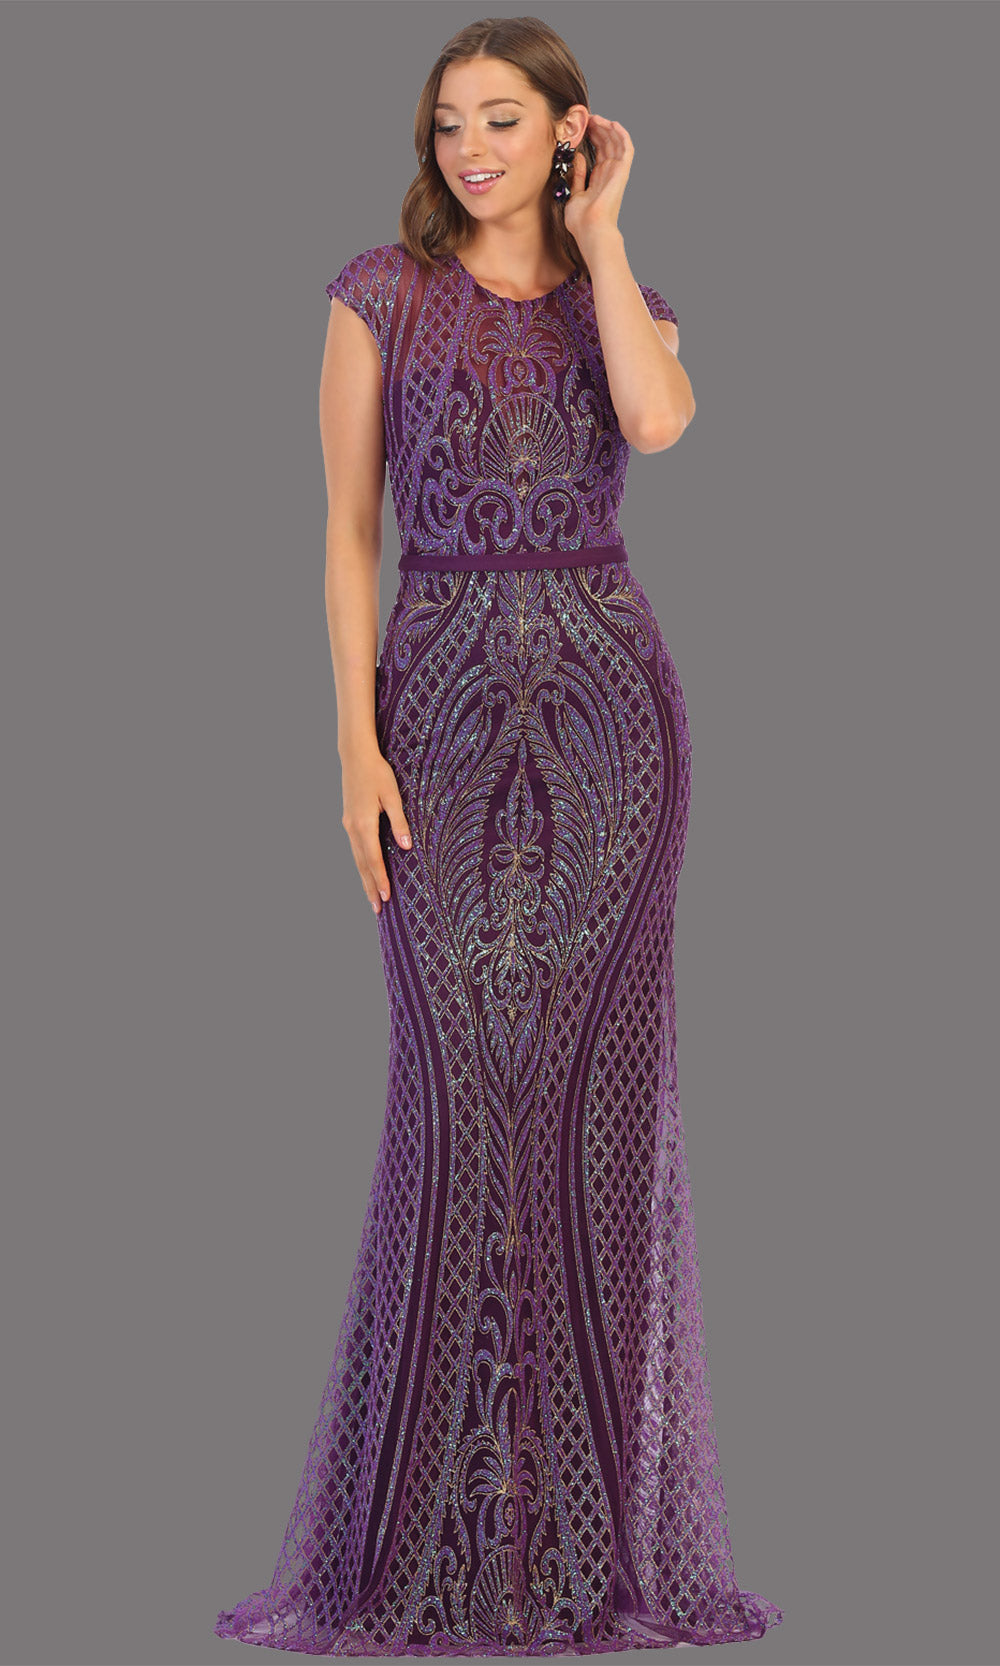 Mayqueen MQ1722 long eggplant beaded fitted dress w/ high neck. This sleek & sexy modest evening purple dress is perfect for prom, engagement/e-shoot dress, formal wedding guest dress, wedding reception dress. Plus sizes avail in dark purple dress